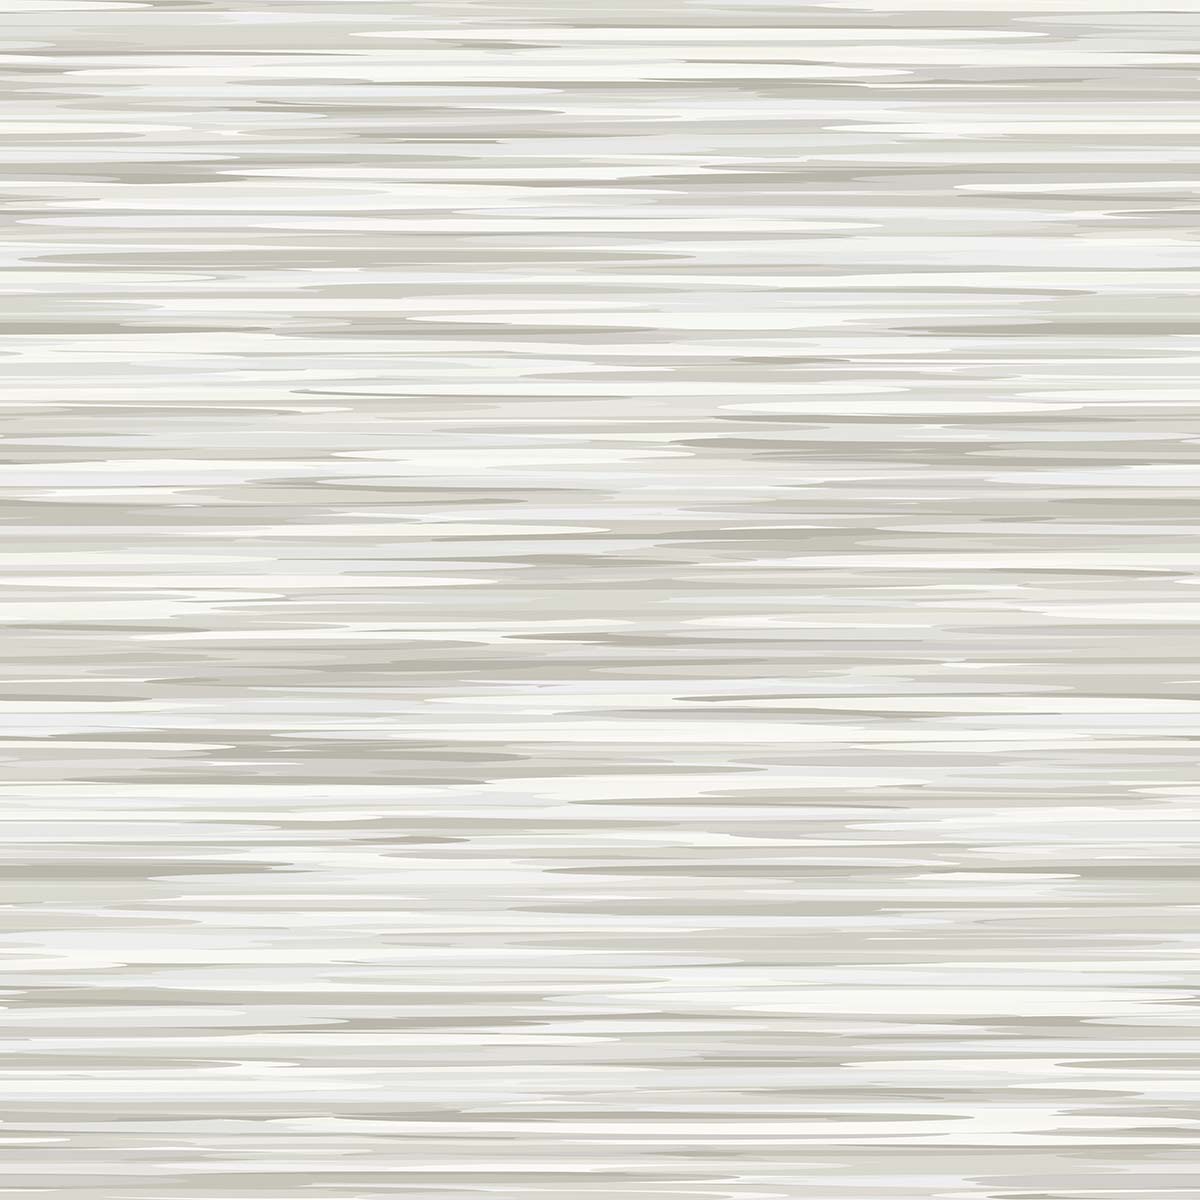 A white and gray striped surface